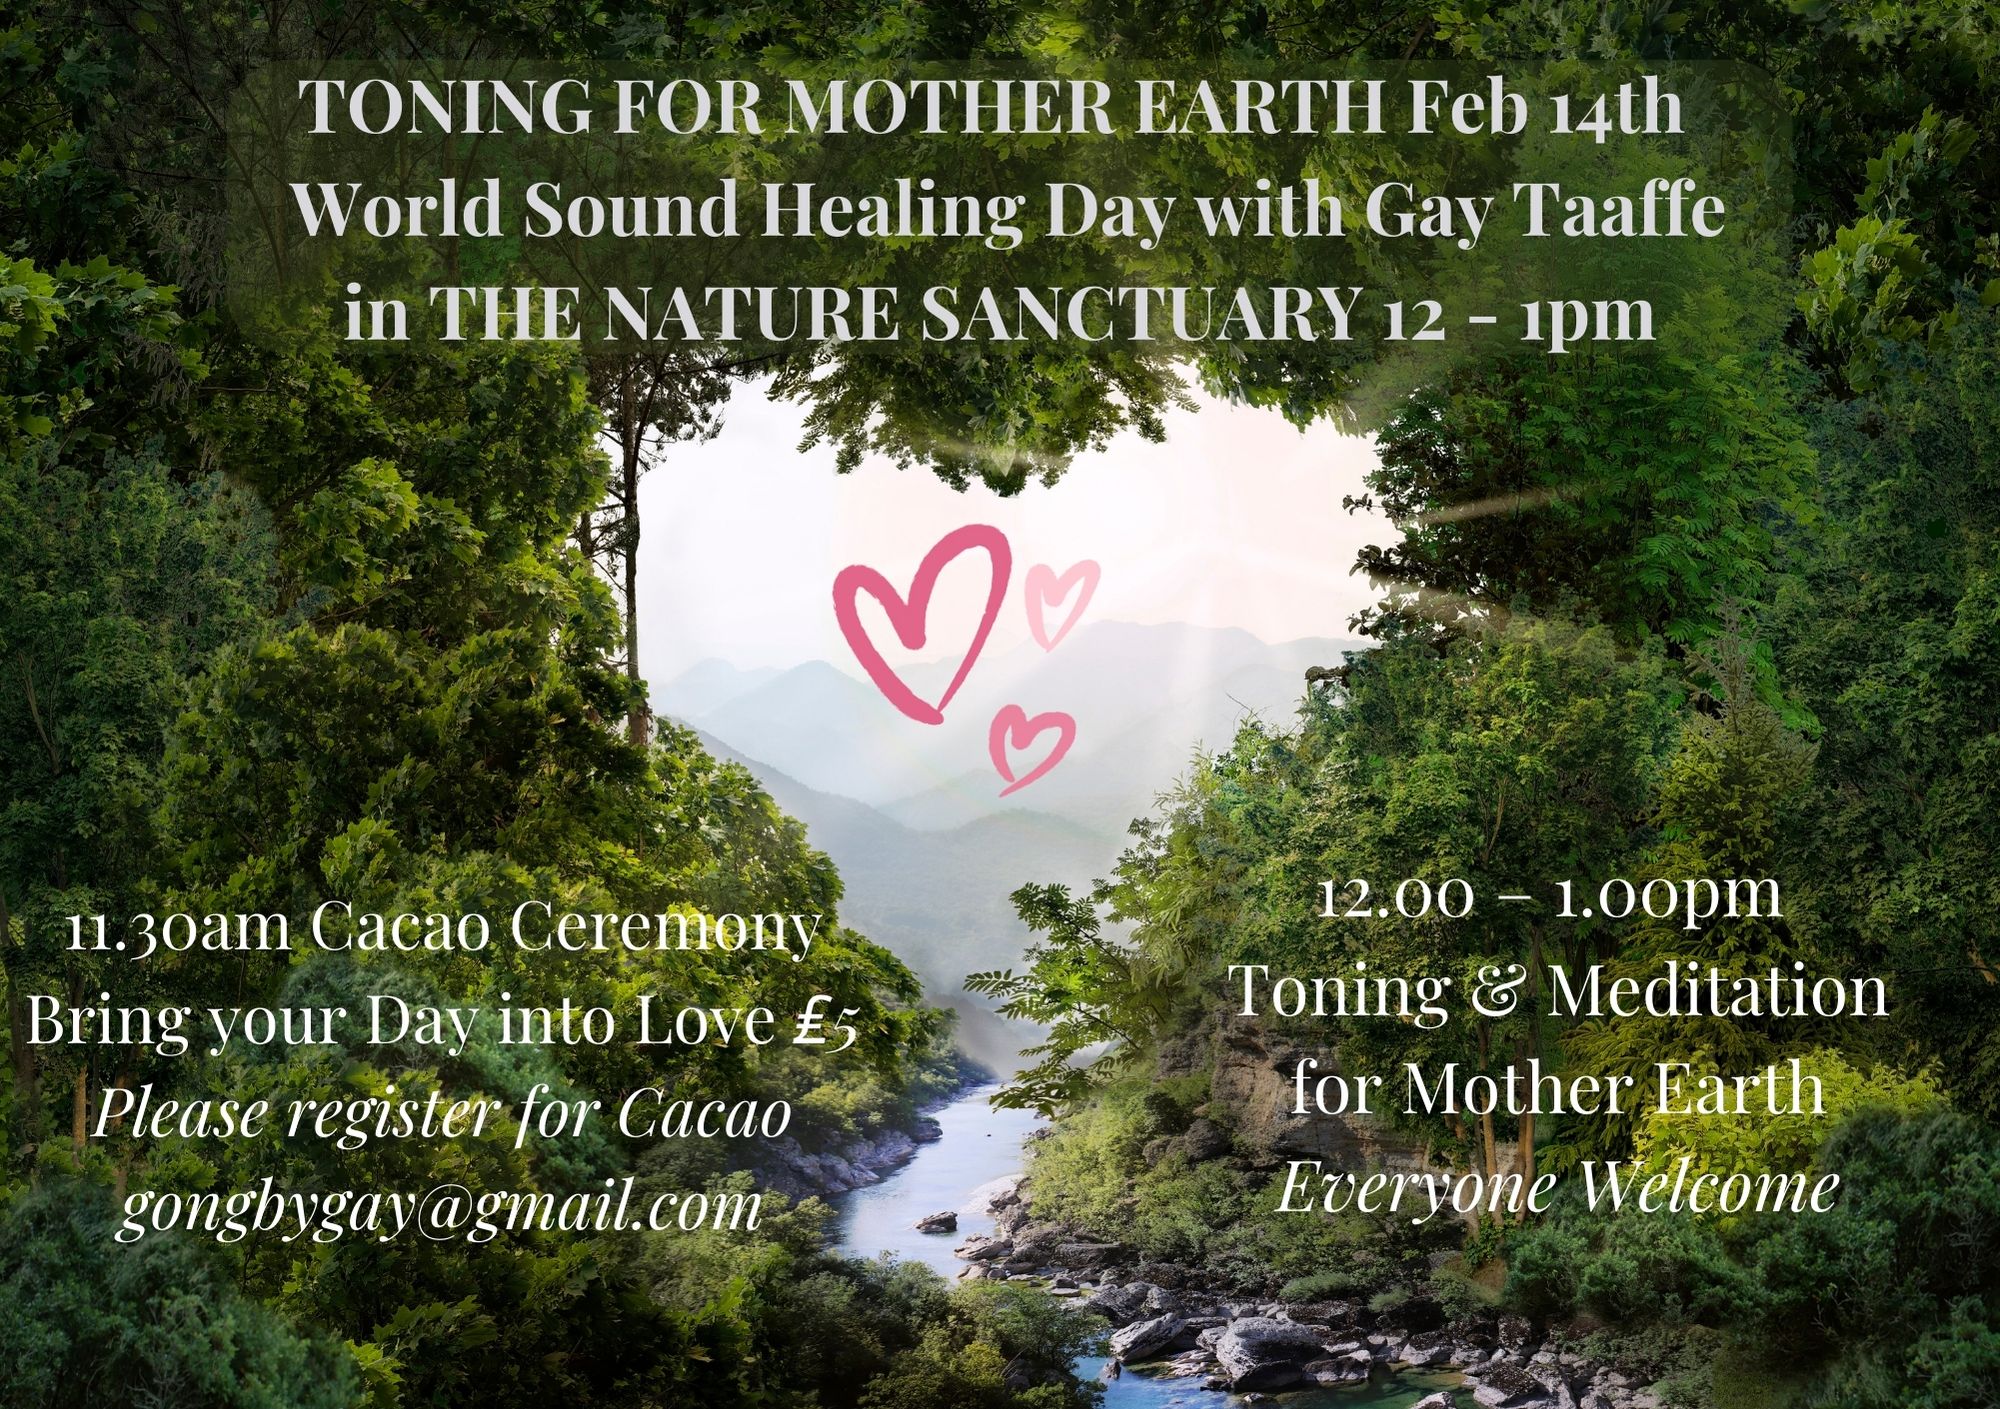 Cacao Ceremony and Toning for Mother Earth